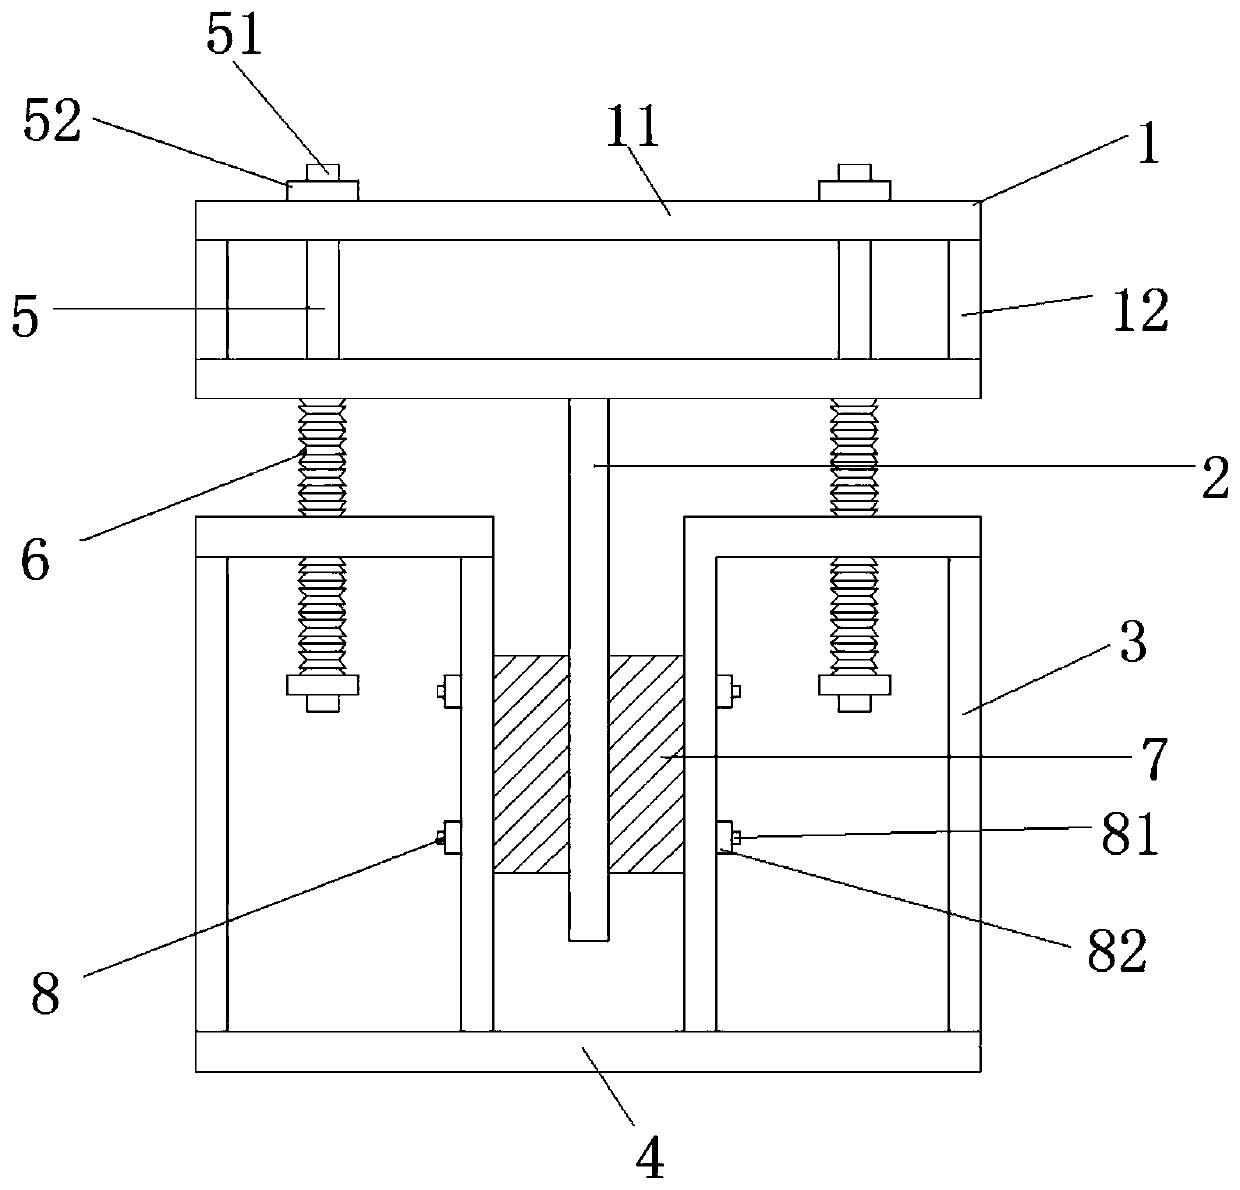 Self-resetting friction damper